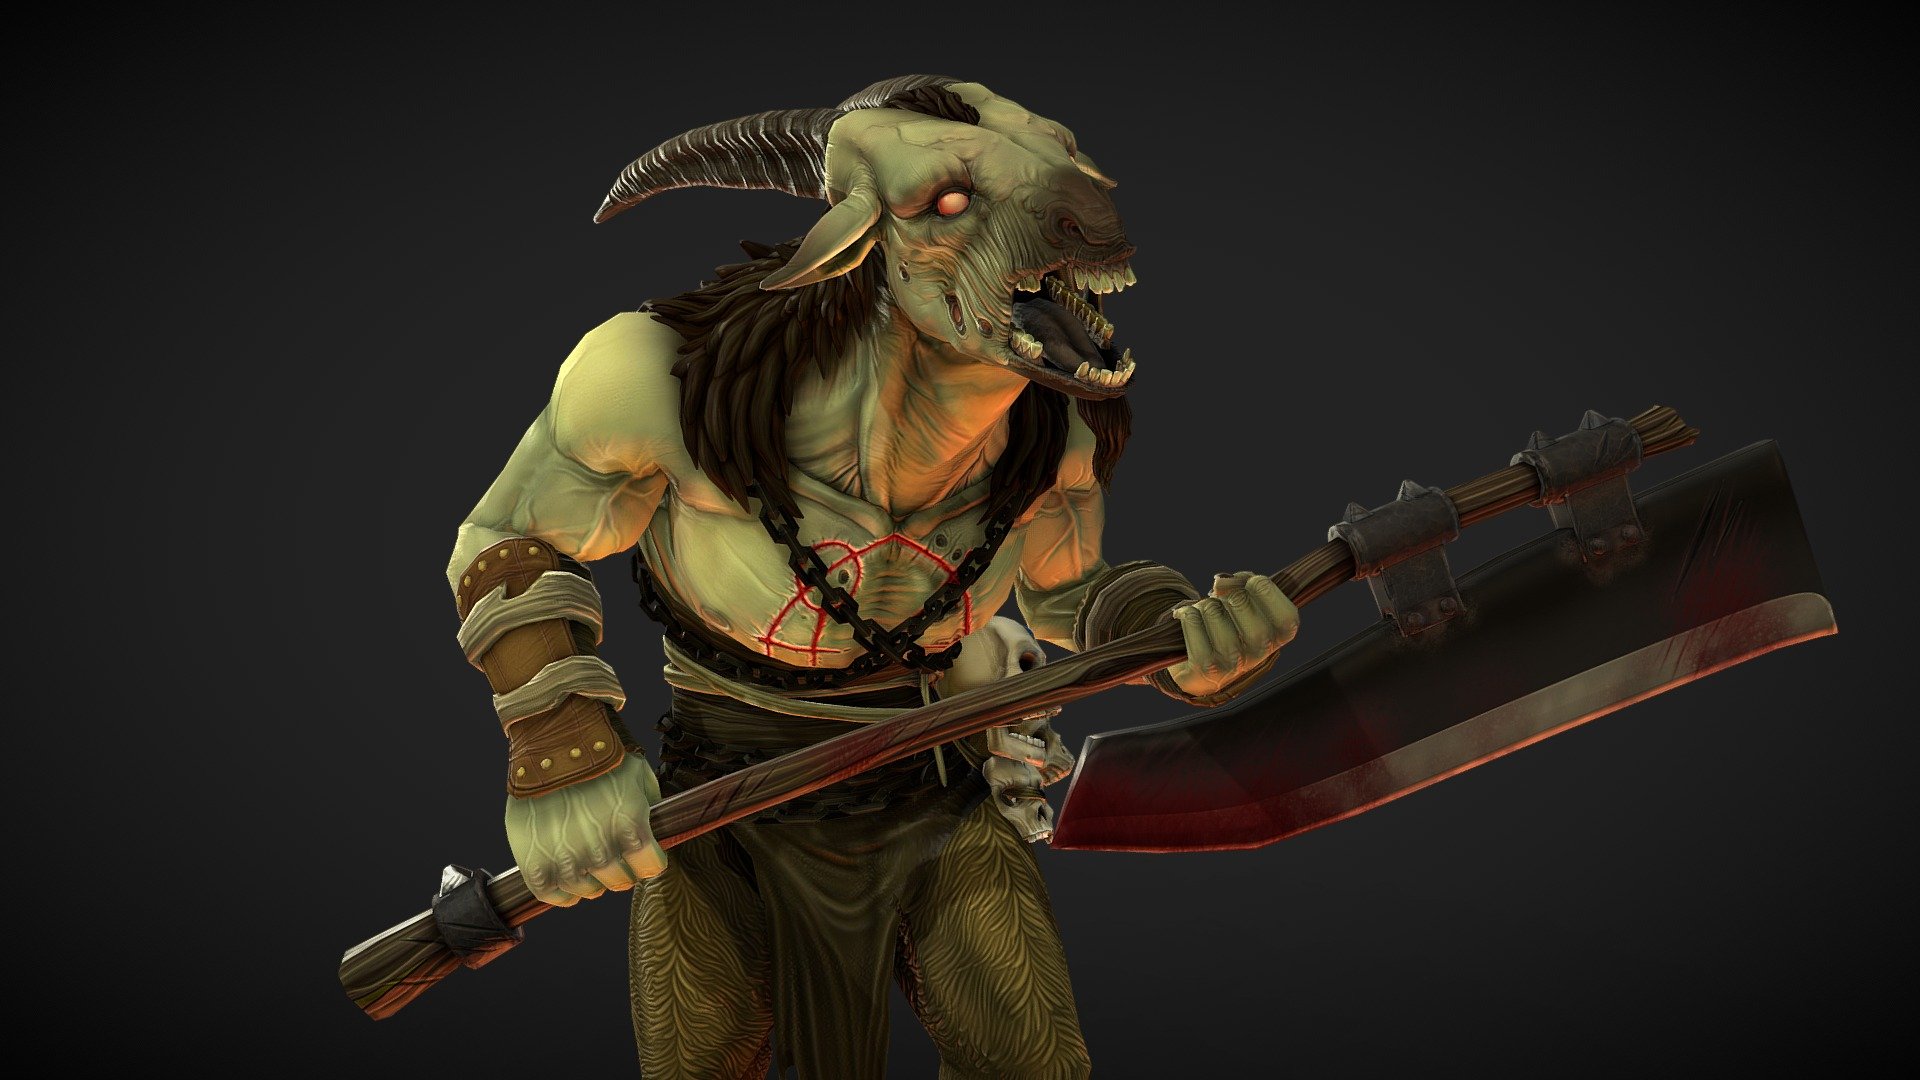 I tried to make the goatman based on the key art of the khazra demons from diablo 4. I know Blizzard already made this creature type for the game but I wanted to try my hand at it as well since I'm a huge diablo fan!
This was a huge learning exp for me and I did 90% of it on my Twitch stream: https://www.twitch.tv/thekawna 

deatails and high poly here: https://www.artstation.com/artwork/9m30RO - Khazra Goatman: Diablo IV fan art - 3D model by Alison Taylor (@Kawna) 3d model